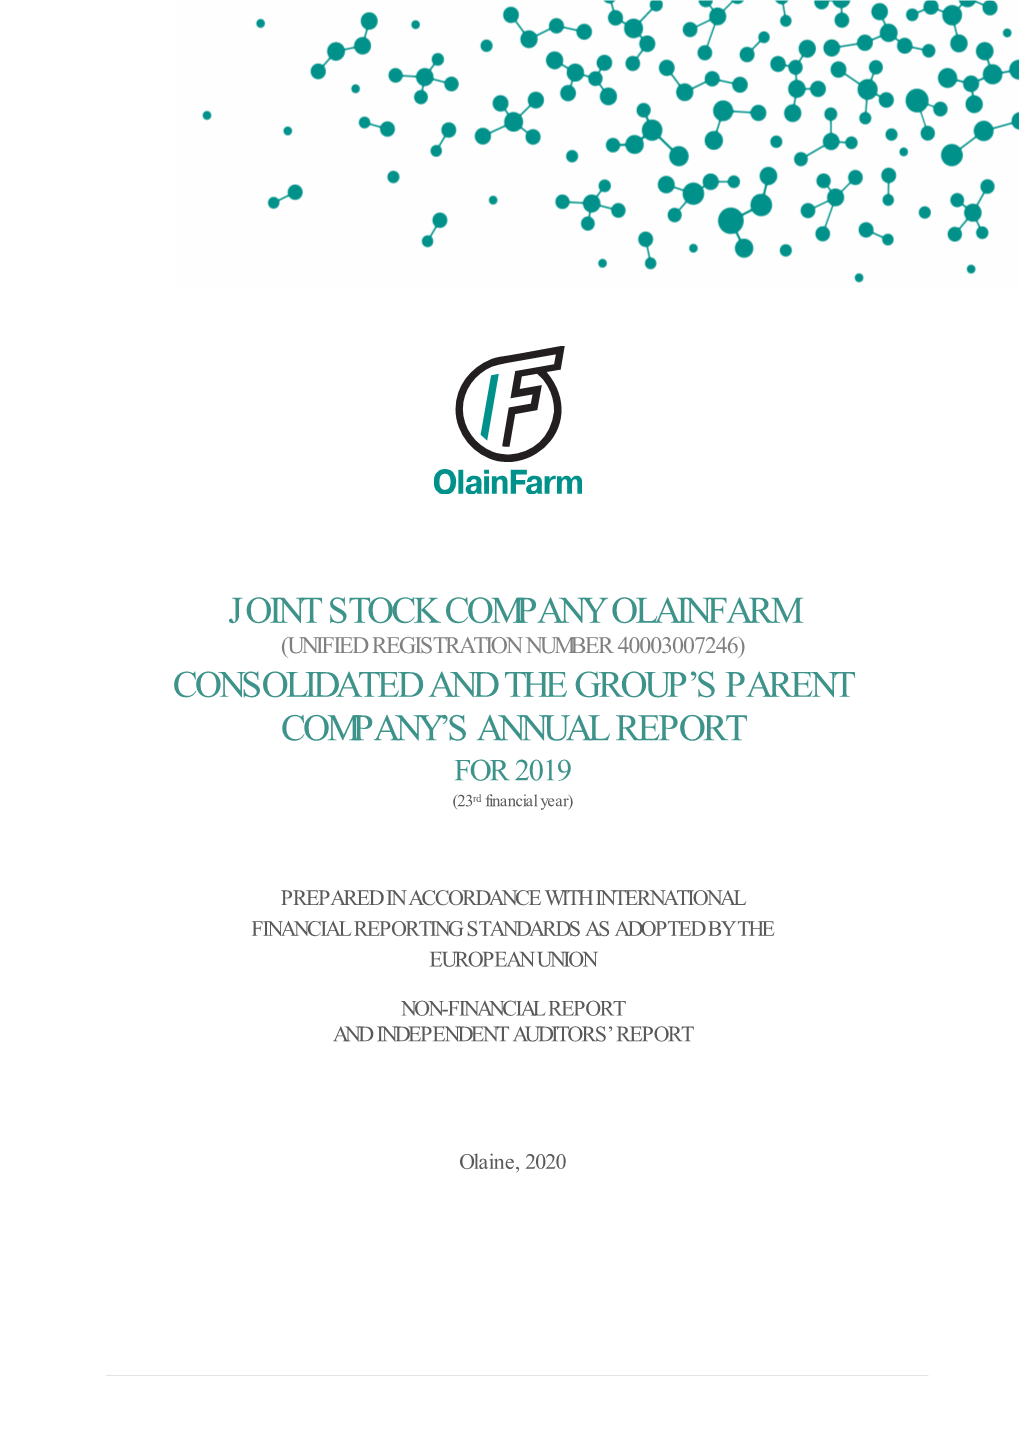 Joint Stock Company Olainfarm Consolidated and the Group's Parent Company's Annual Report